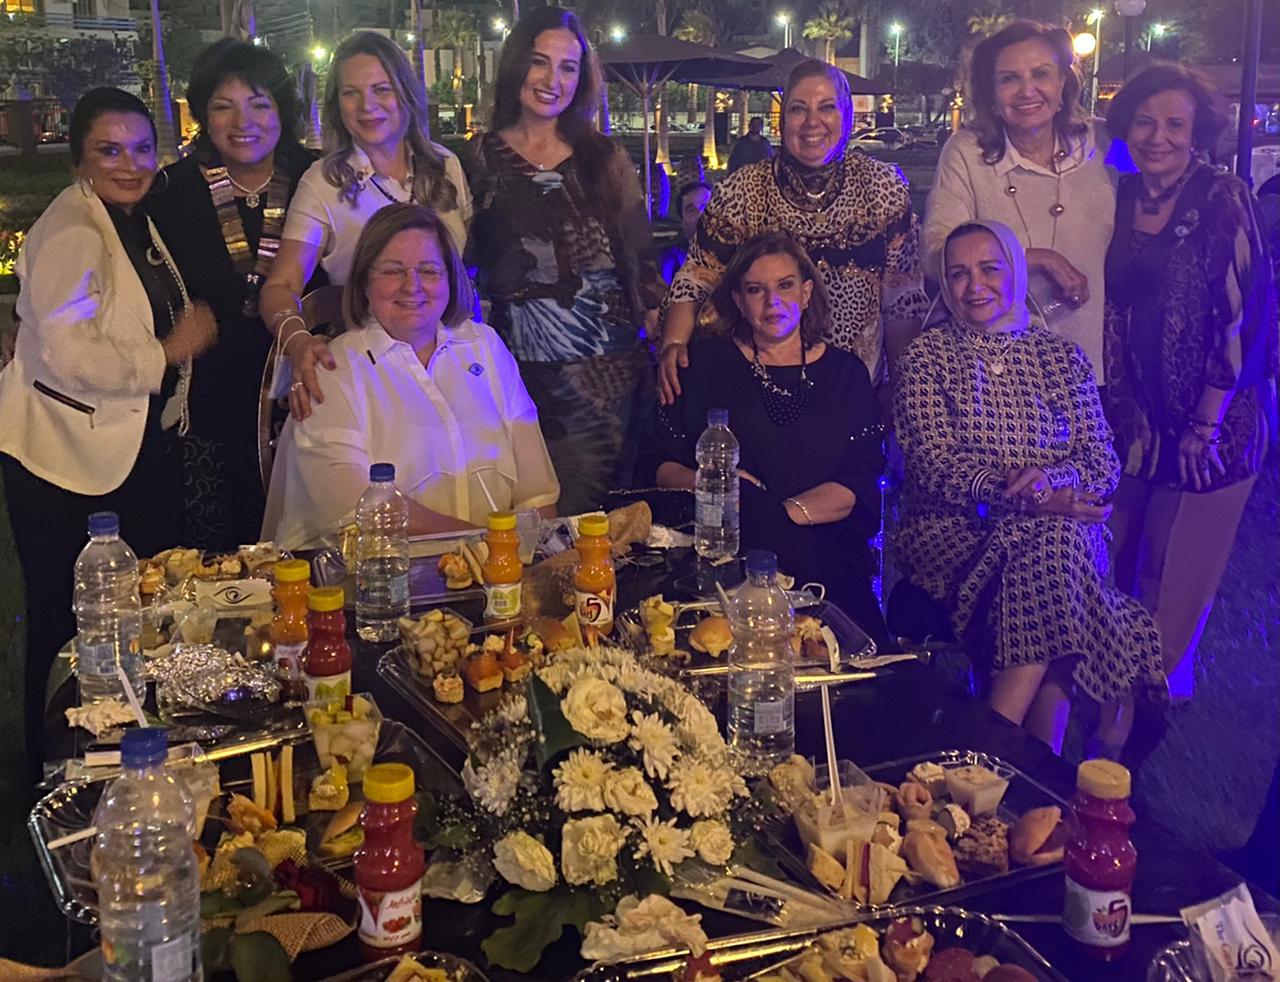 2-Mrs. Iman Al-Bashari, the National Representative, and Mrs. Hala Hagrass, the District Chairman , along with members of the board of directors of D 95 Egypt and Jordan attended the ceremony